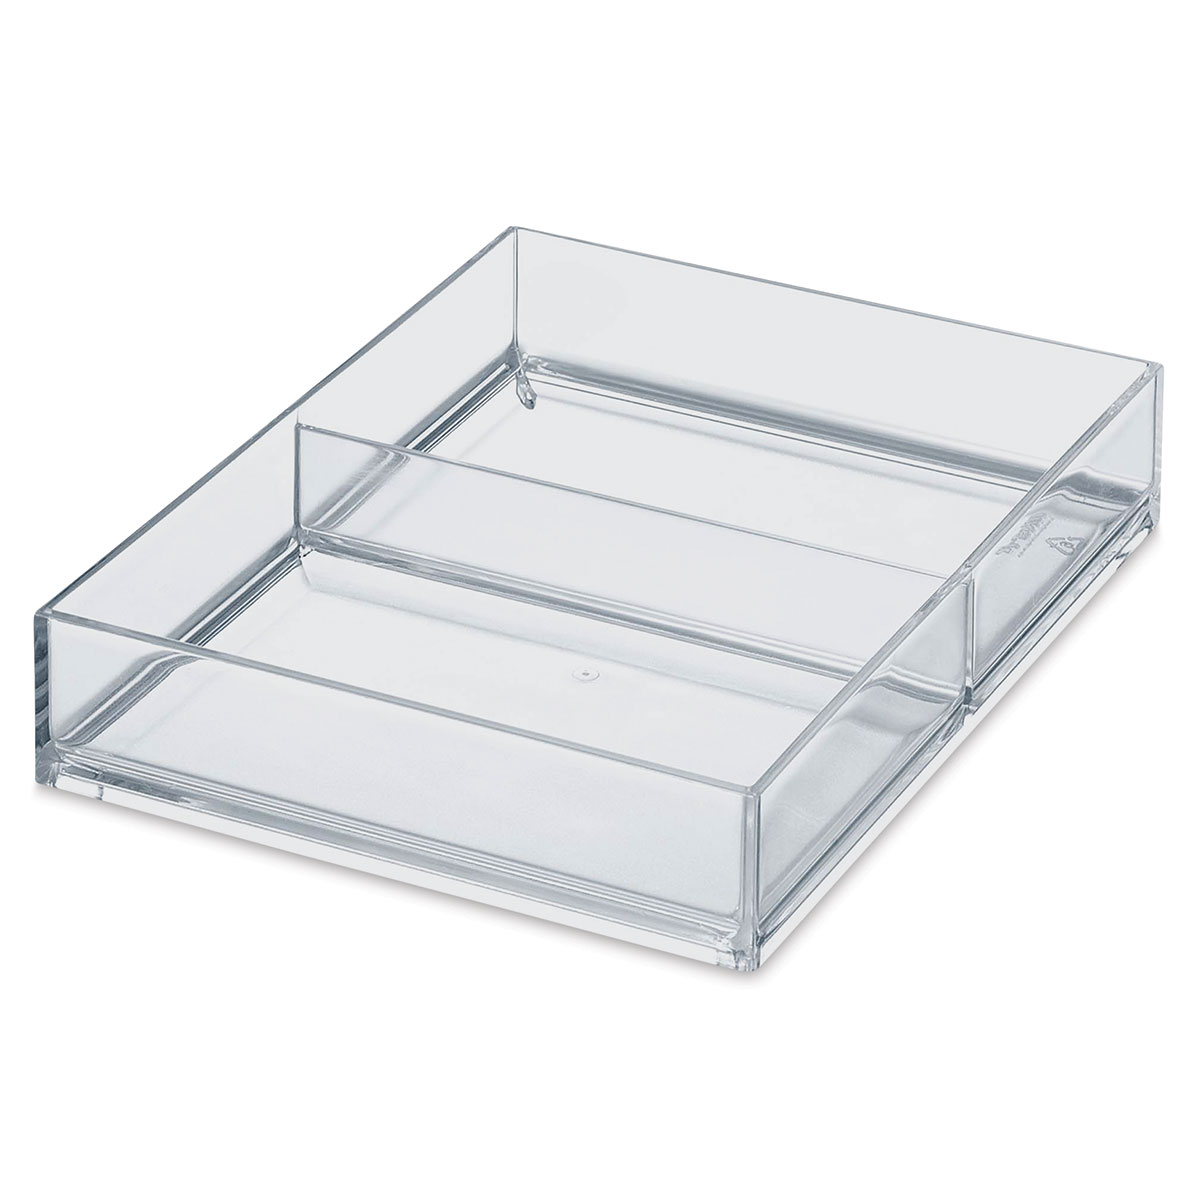 Stackable Jewelry Tray-Plastic-White-Full Size-1